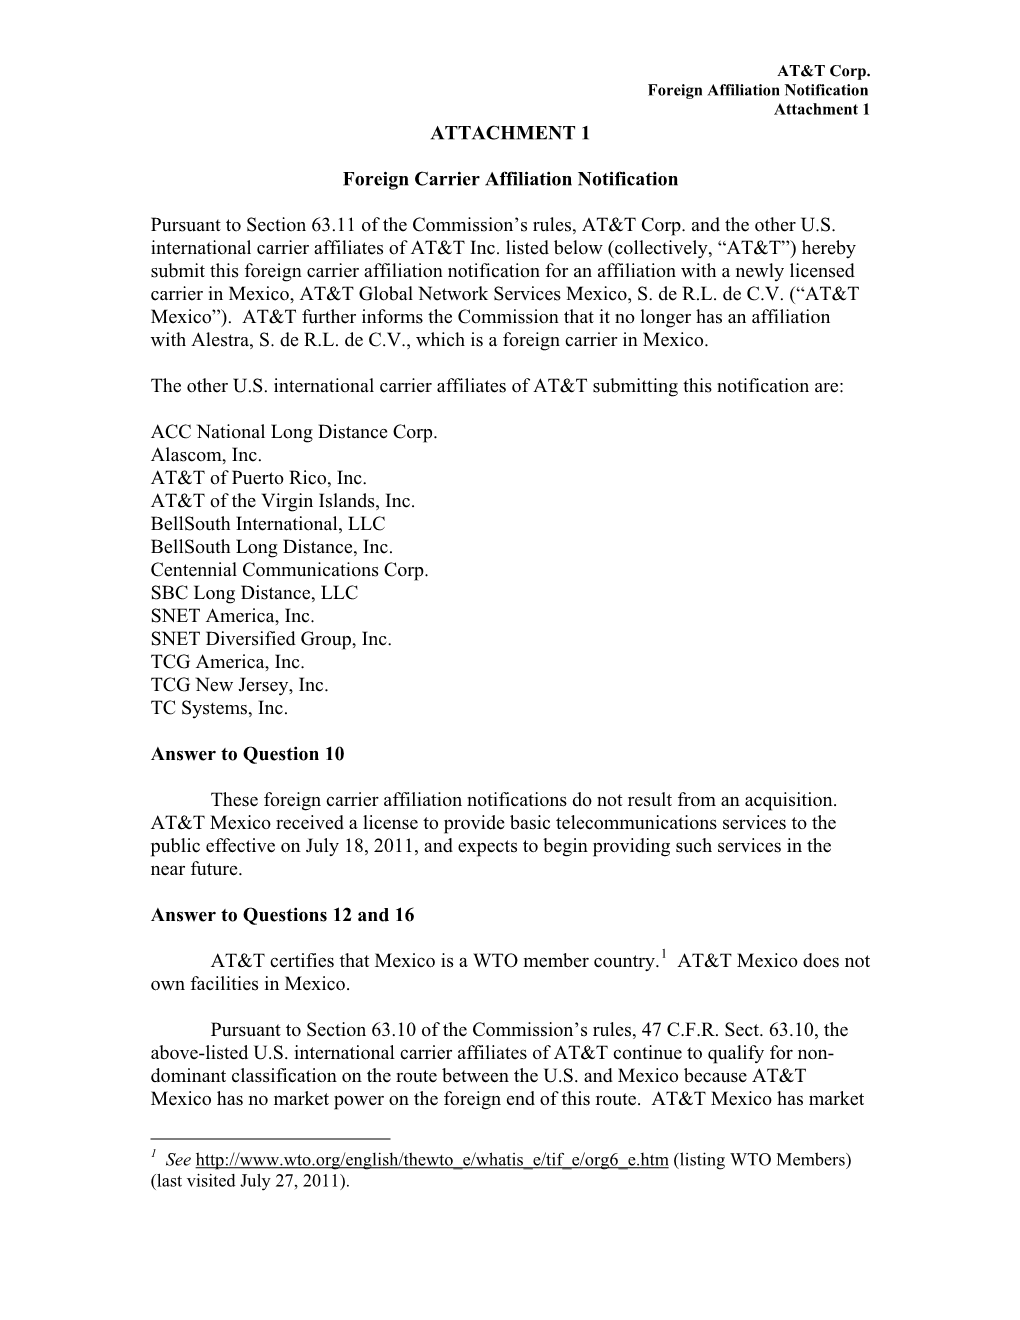 ATTACHMENT 1 Foreign Carrier Affiliation Notification